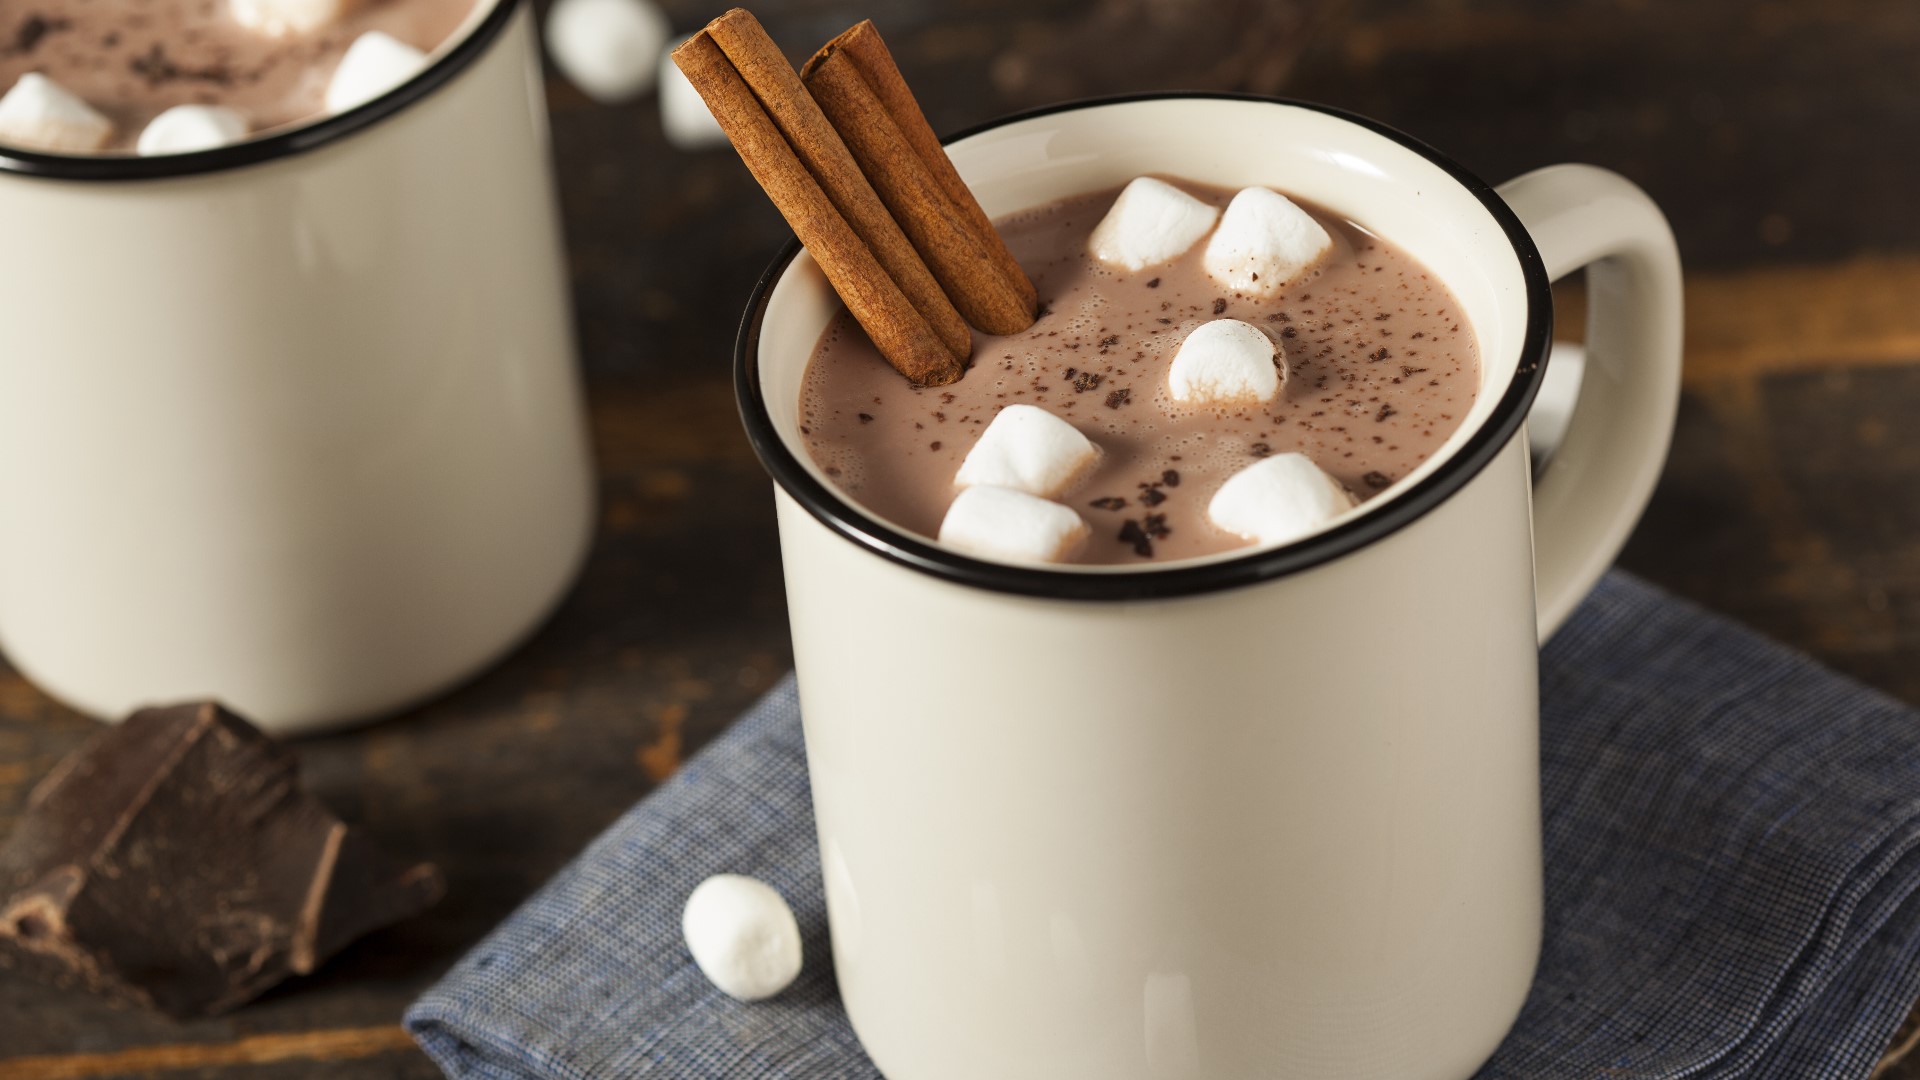 A love for hot cocoa could get you some serious cash.